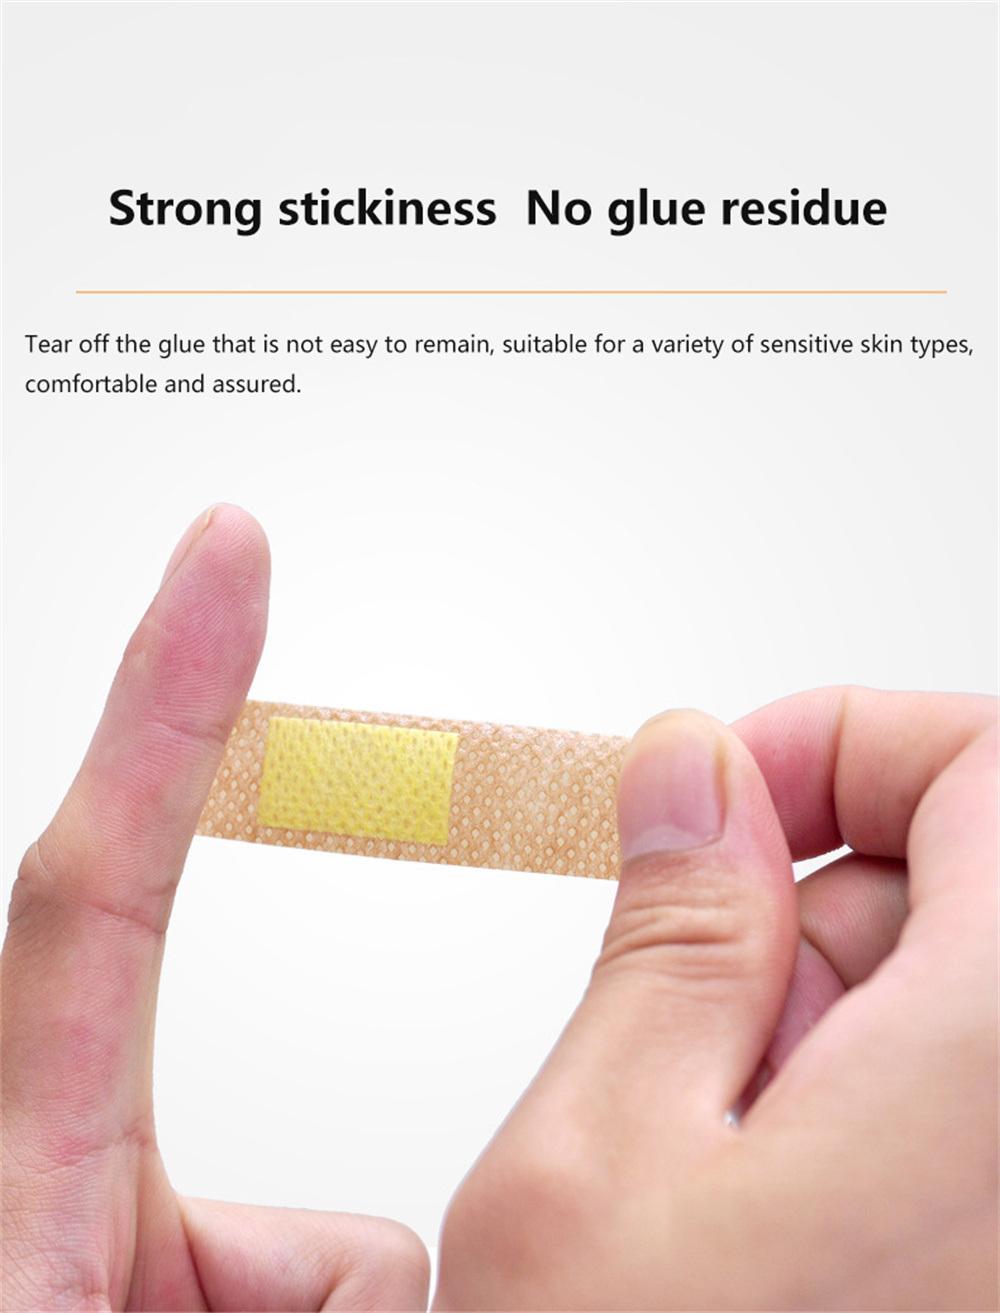 Band-Aid Universal Adhesive Bandage First Aid Dressing Complexion Bandage